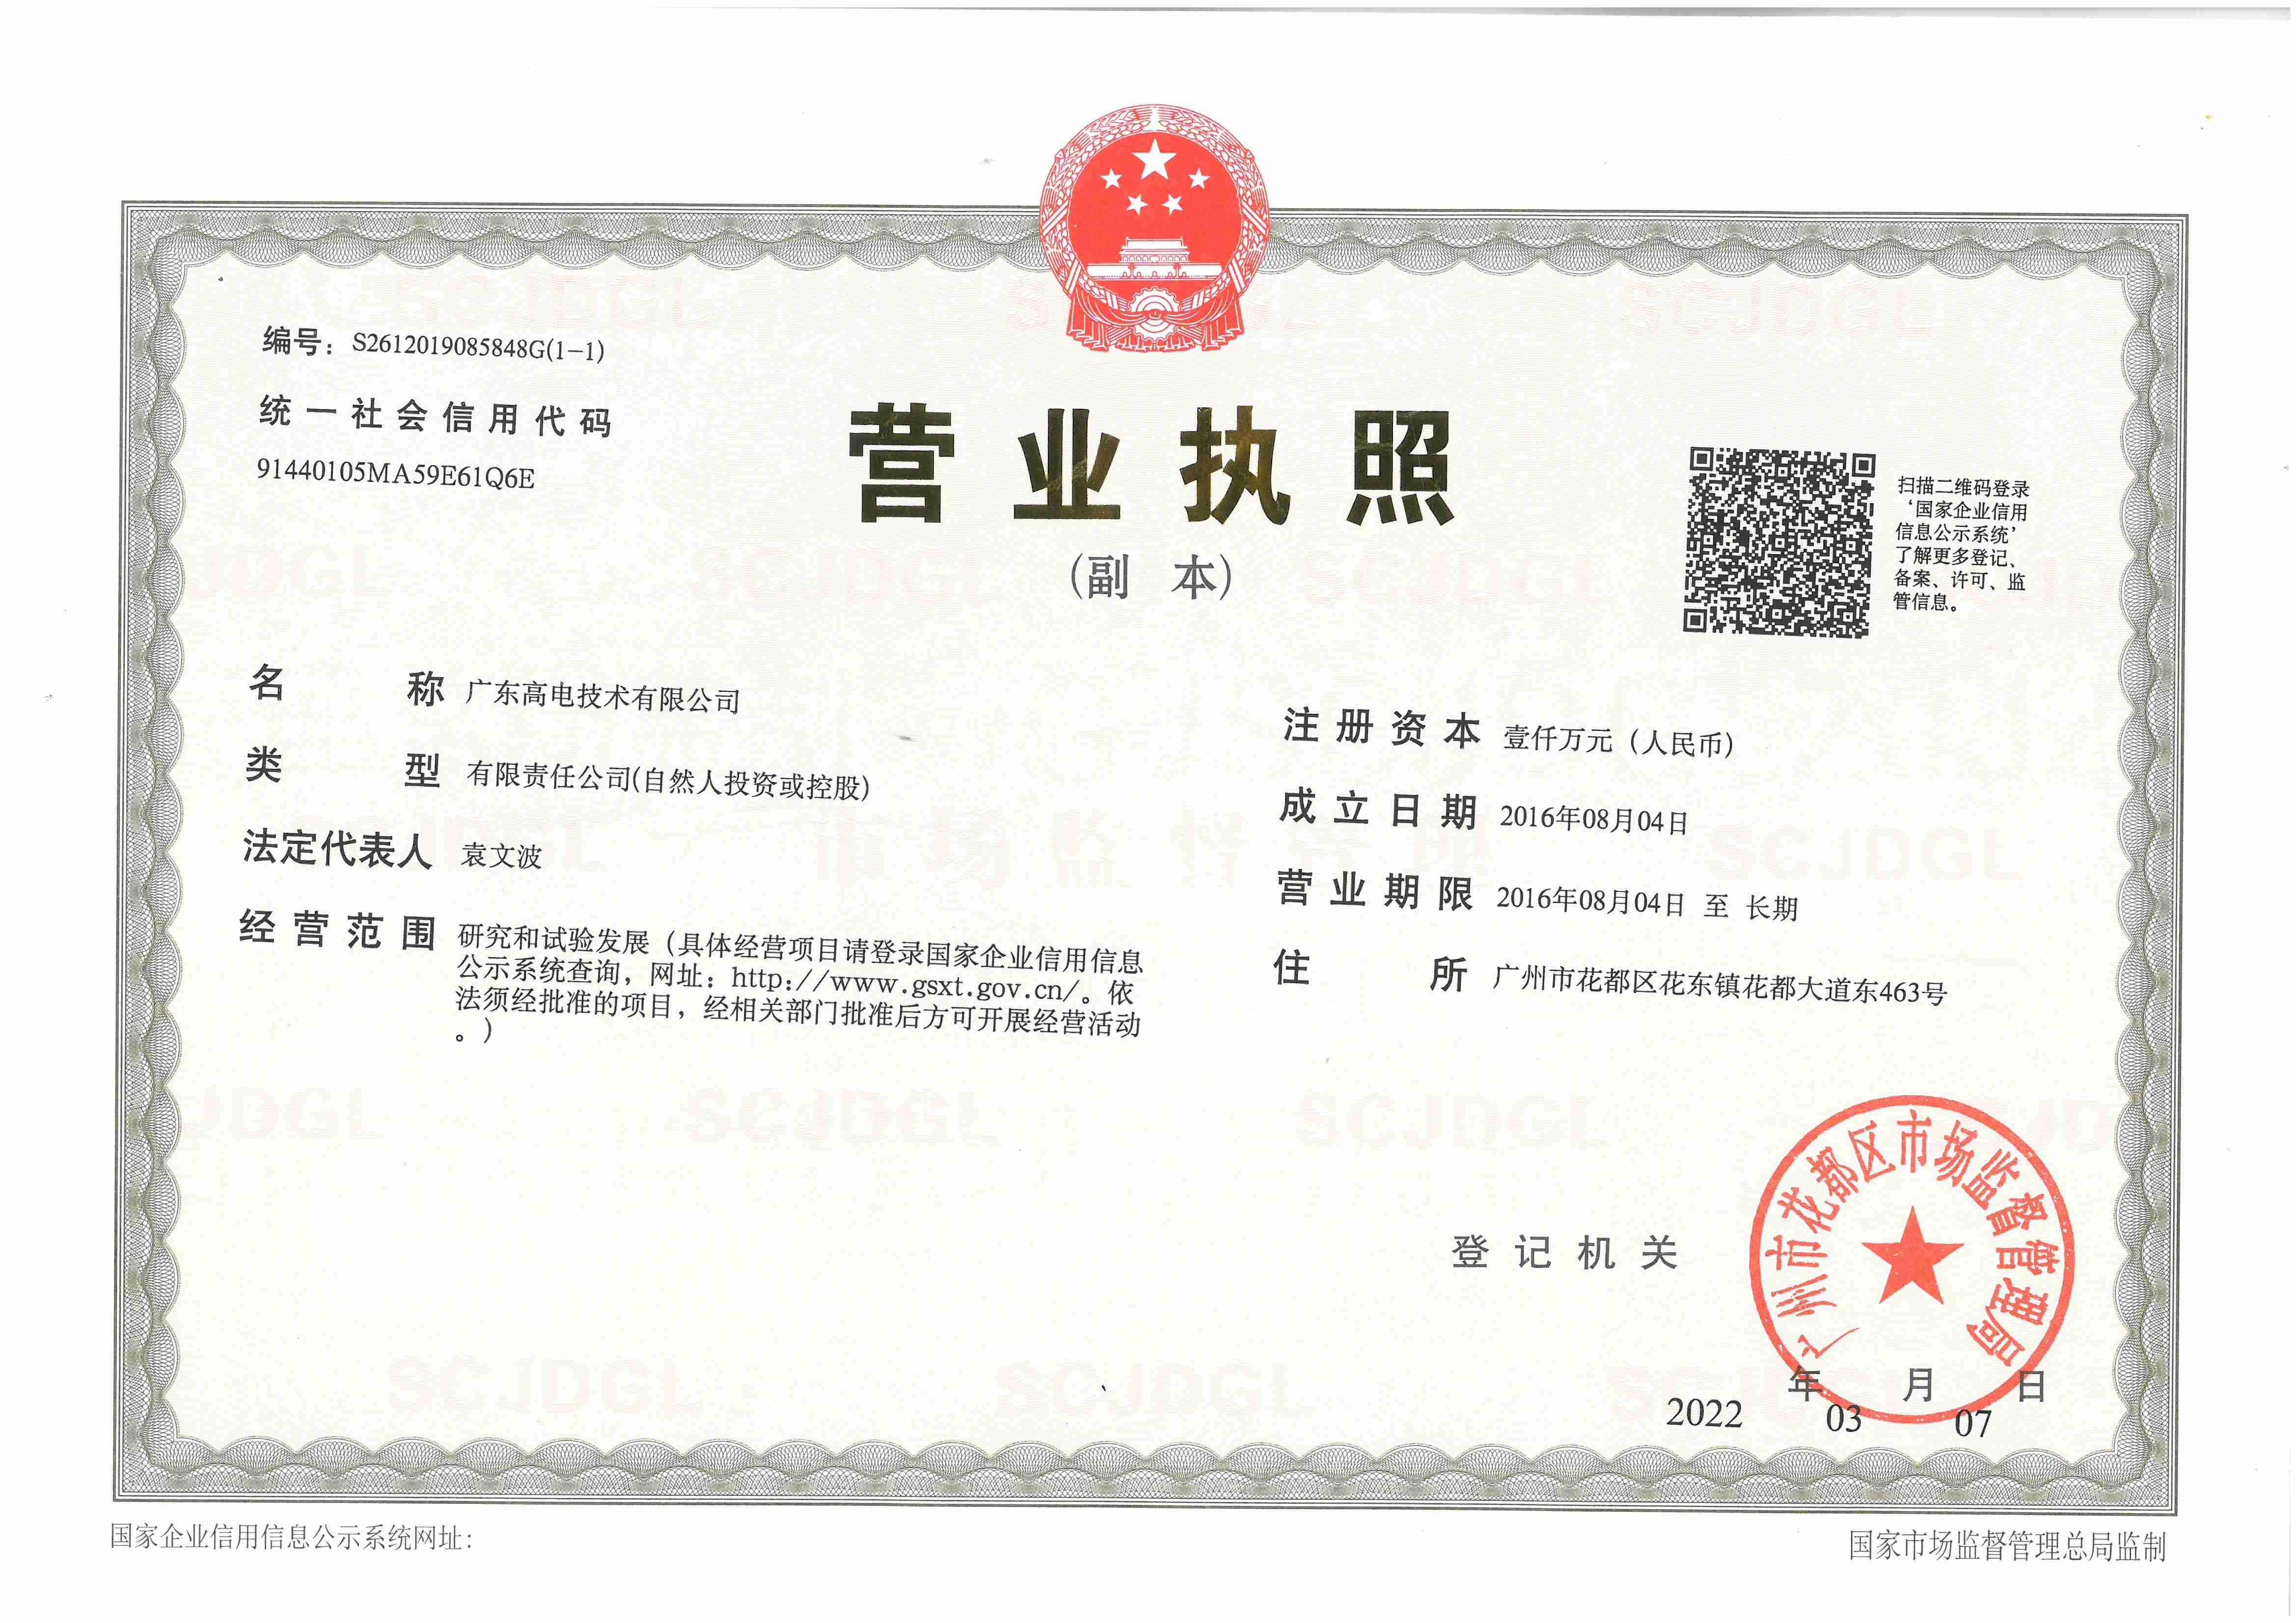 Business license of Guangdong Gaodian Technology Co., Ltd